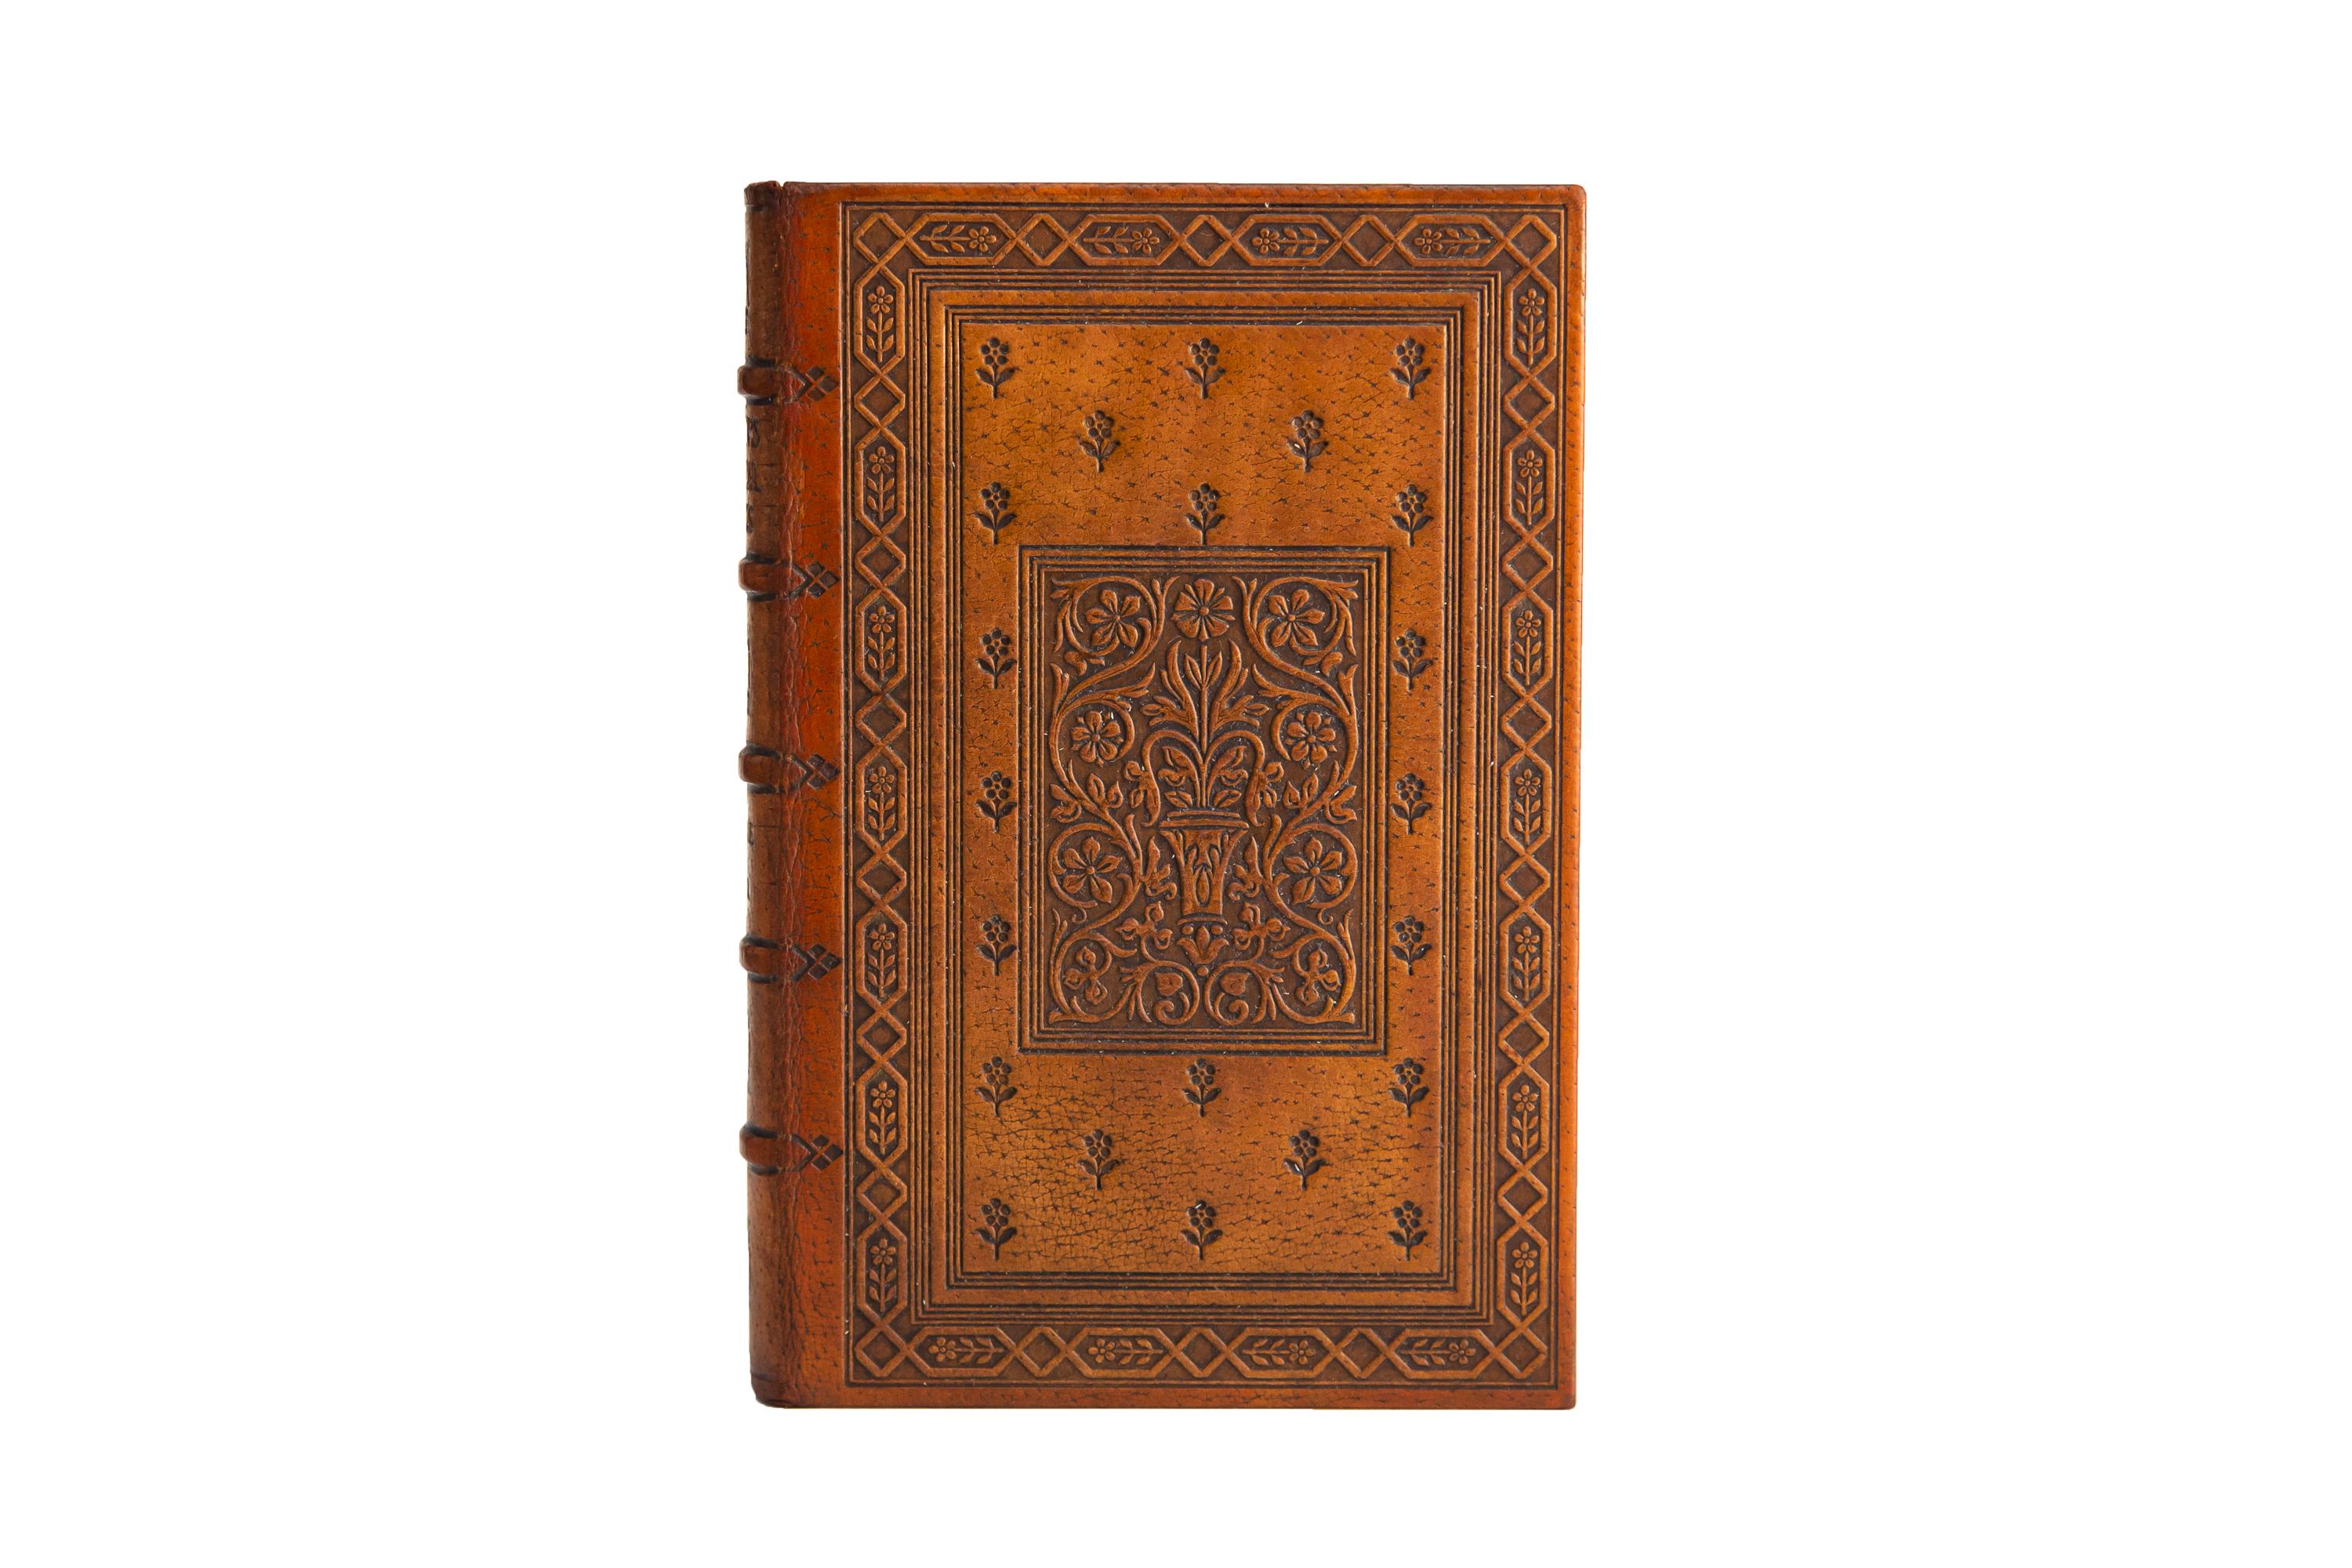 4 Volumes. John Milton, The Poetical Works. Limited edition. Bound in full tan morocco with the covers displaying ornate floral open-tooled detailing and bordering. Raised bands with panels displaying open-tooled floral details and label lettering.